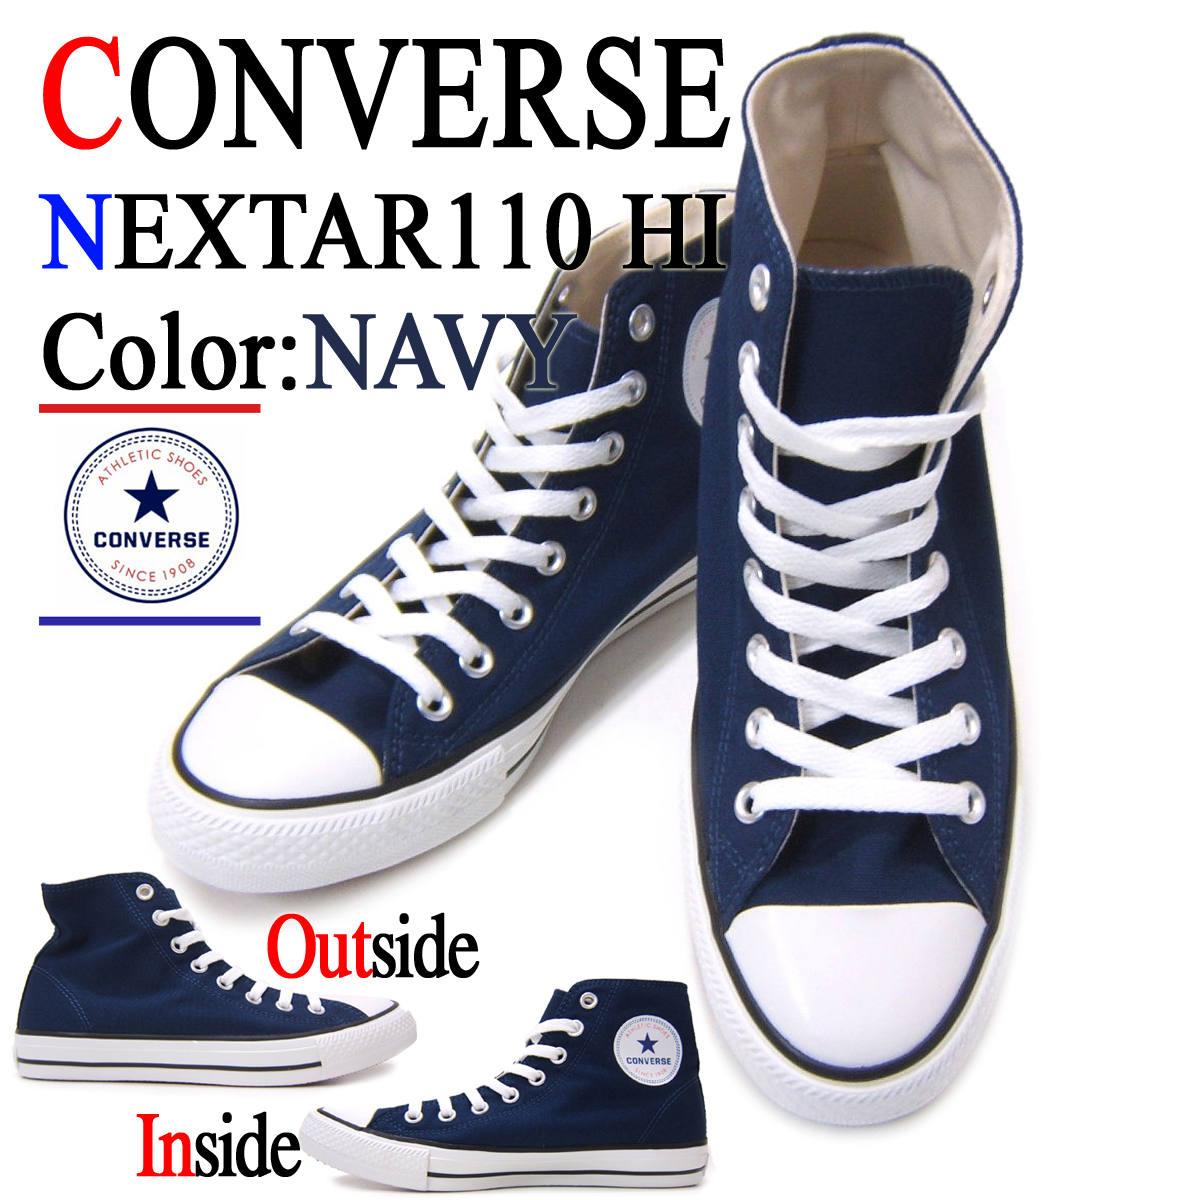 how to decorate converse with rhinestones